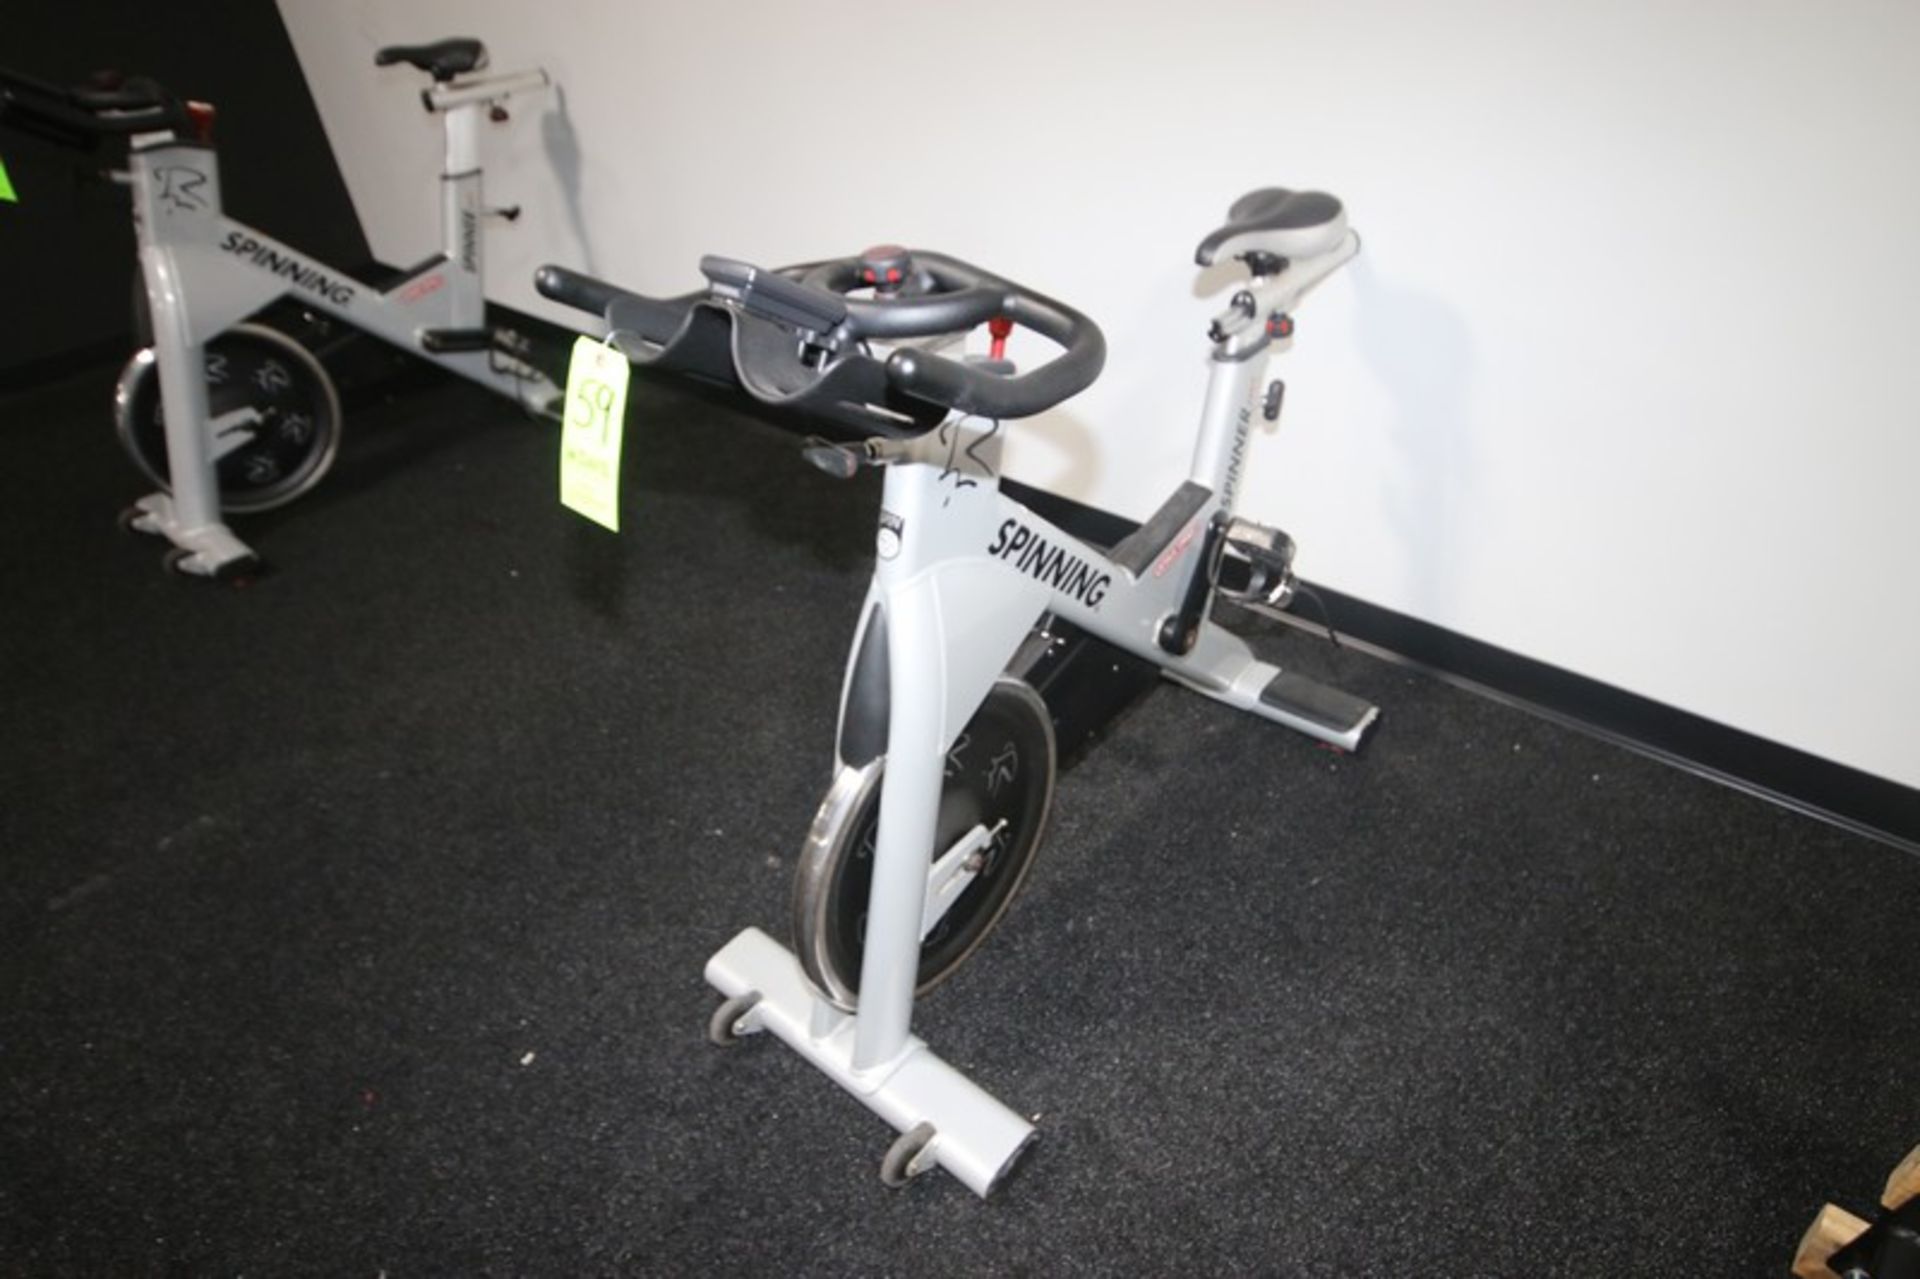 Spinner NXT Spin Bike (LOCATED @ 2806 GOLDEN MILE HWY, ROUTE 286, PITTSBURGH, PA 15239) - Image 2 of 2